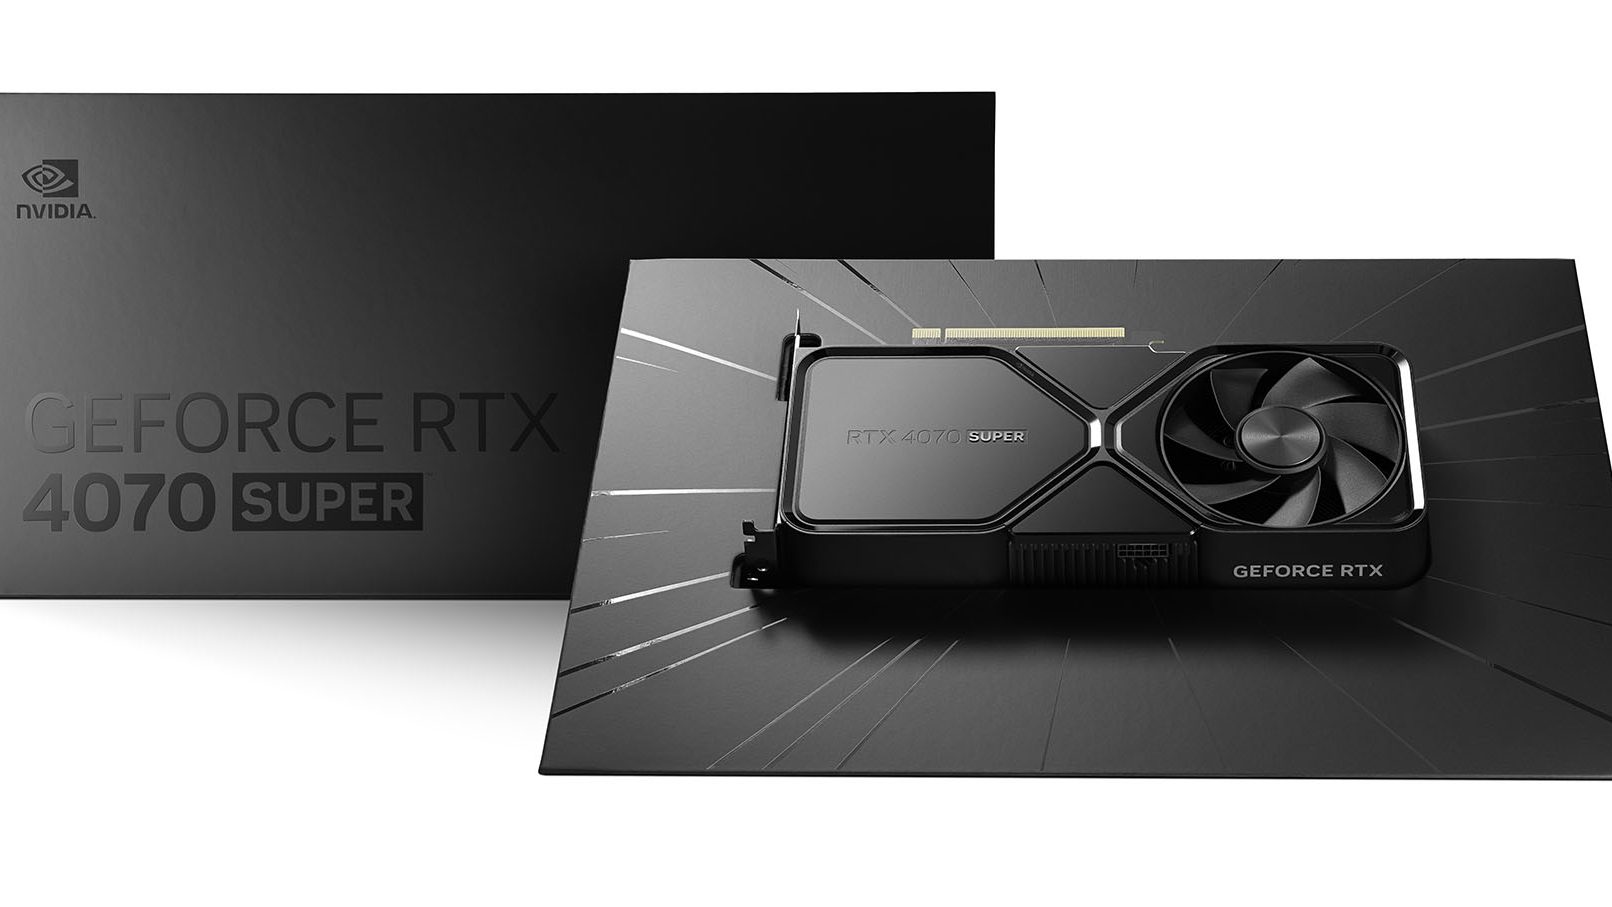 GeForce RTX 4070 SUPER with Packaging Image